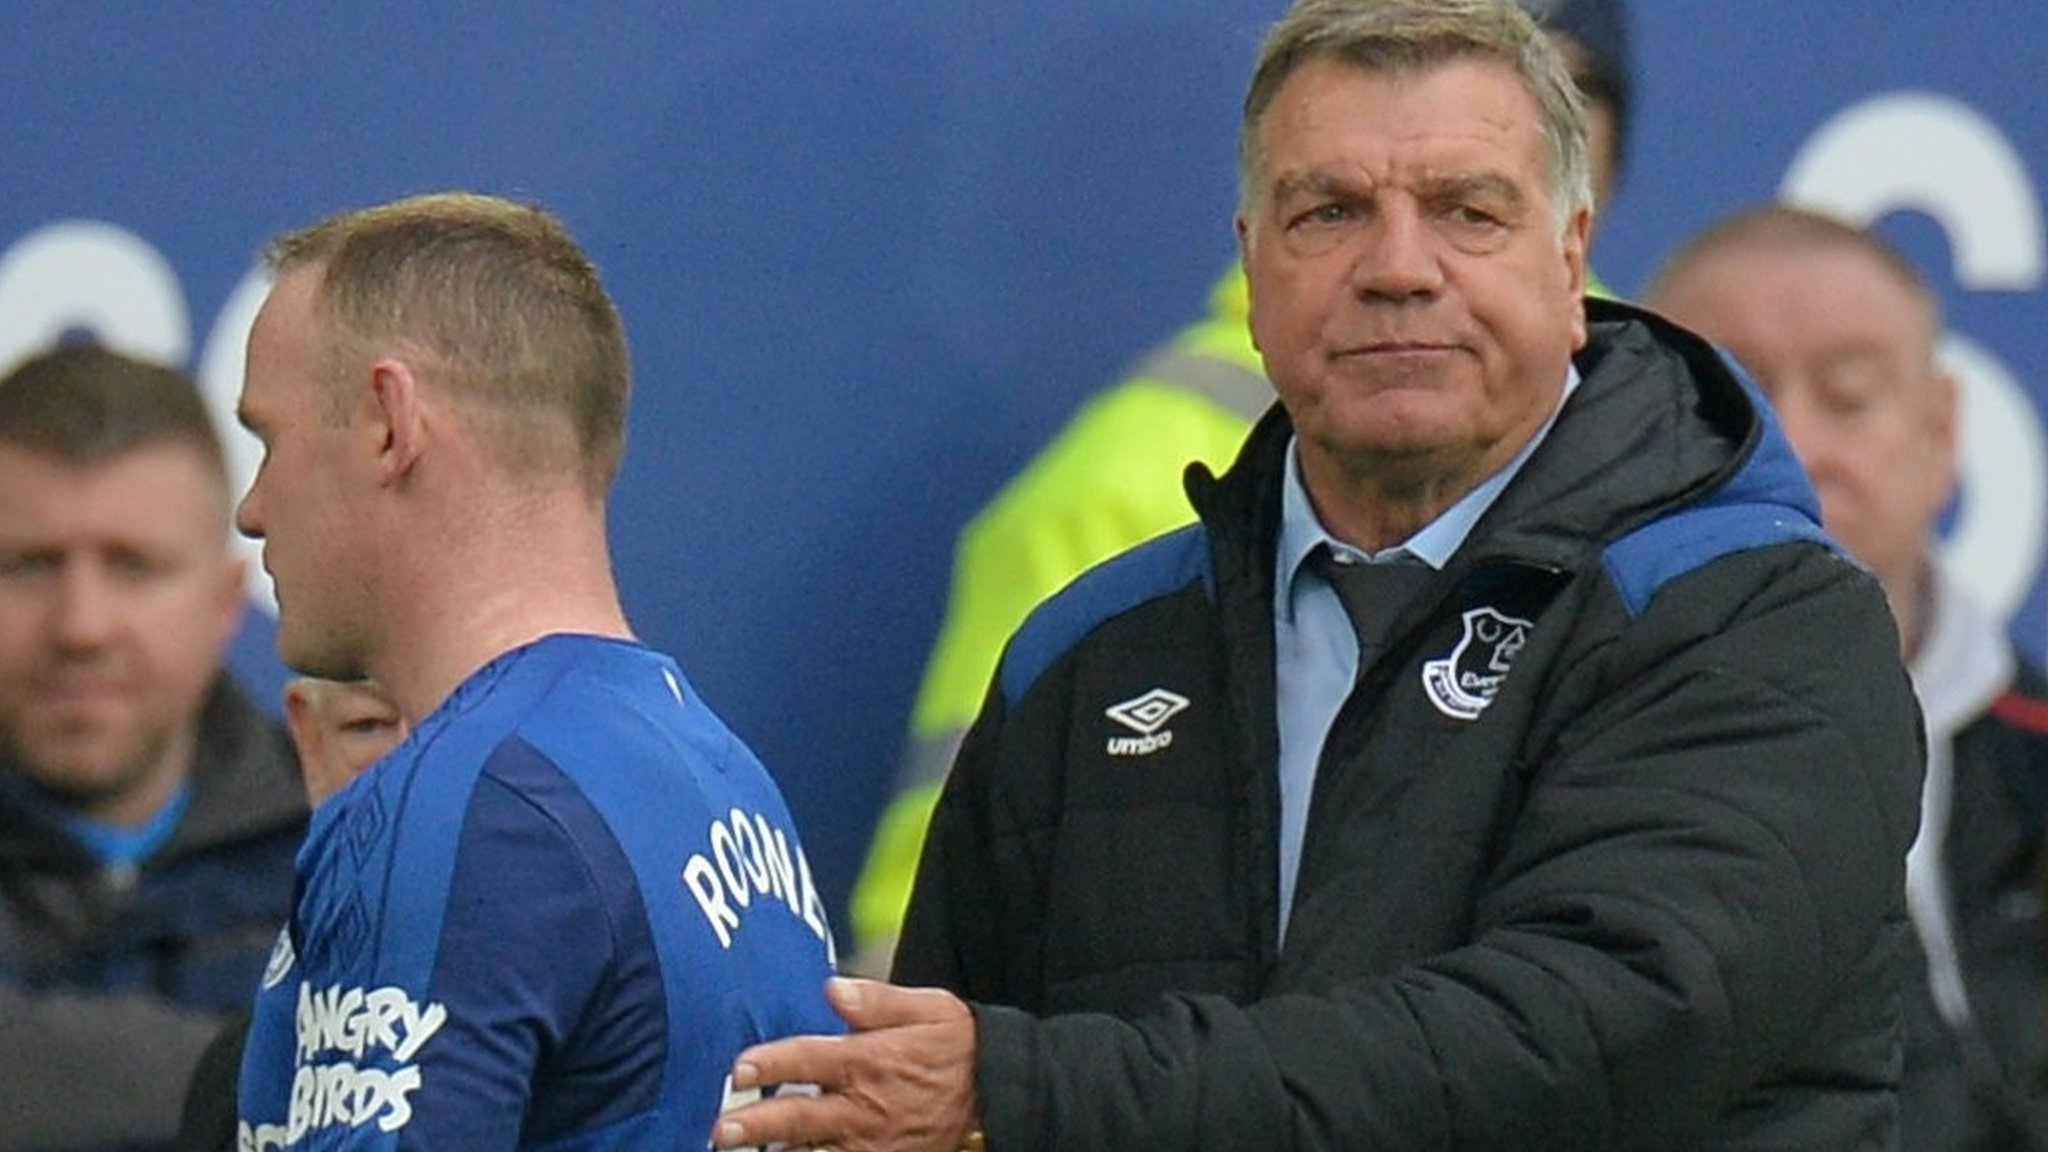 Rooney has not asked to leave Everton - Allardyce